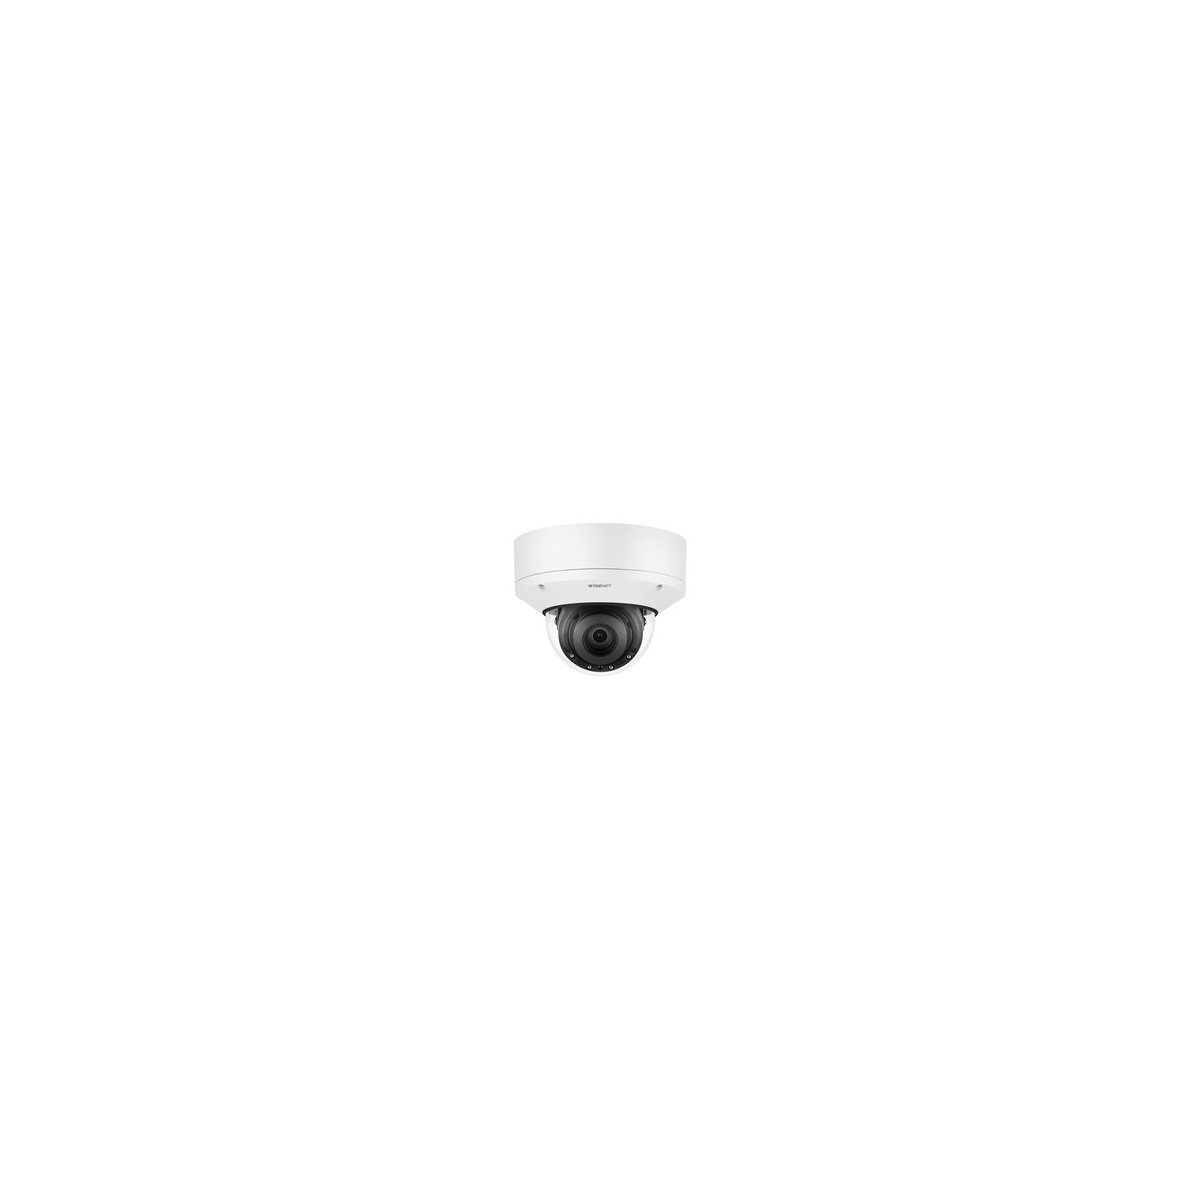 Hanwha Techwin Hanwha PND-A6081RV - IP security camera - Indoor  outdoor - Wired - Ceiling - White - Dome